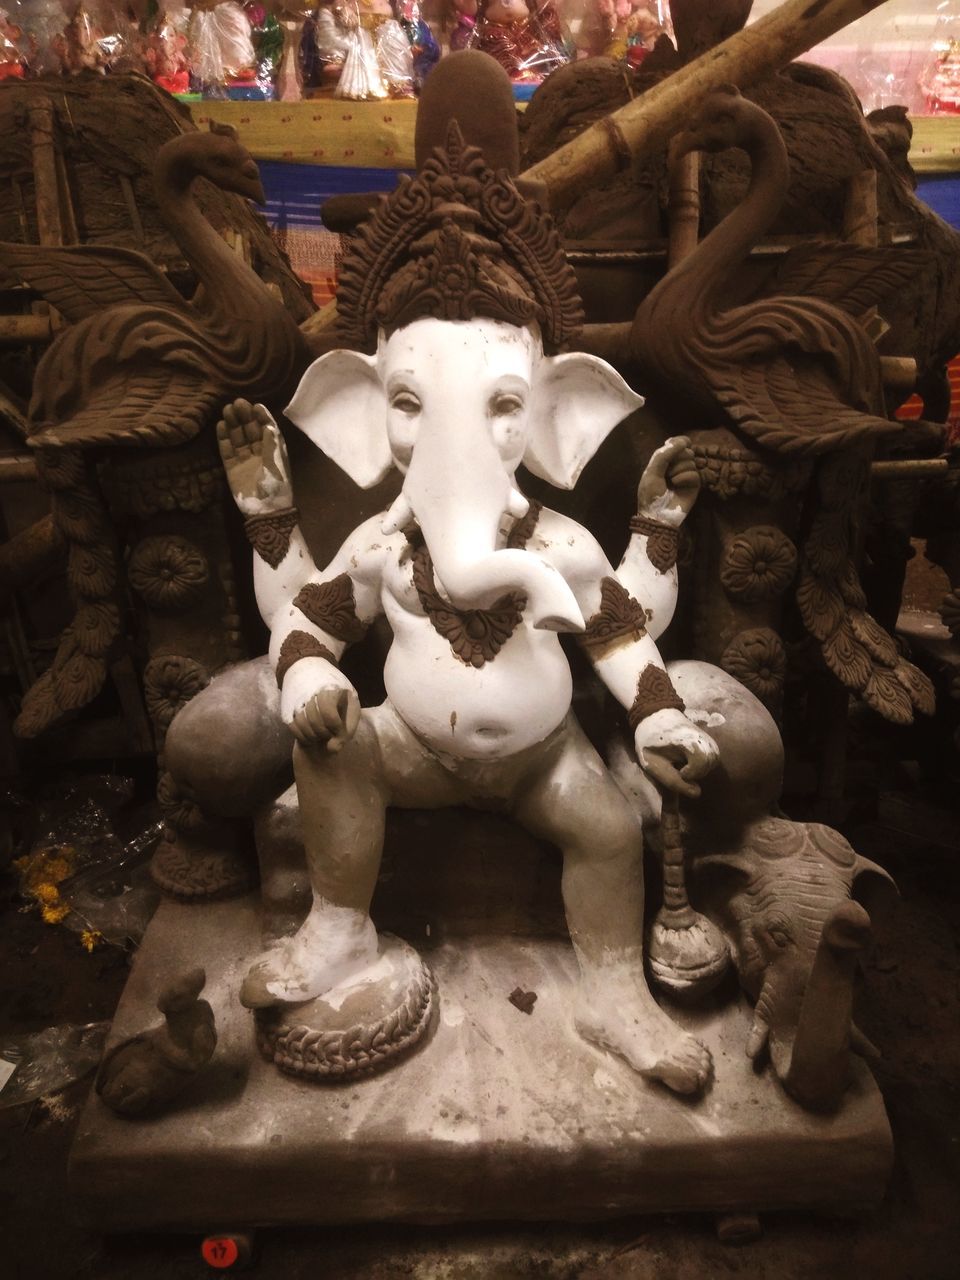 LORD GANESHA... Elephant Mouse Statue Sculpture Place Of Worship Spirituality Religion Tradition Cultures Carving - Craft Product Art And Craft Asian Elephant National World - Football Fanatics